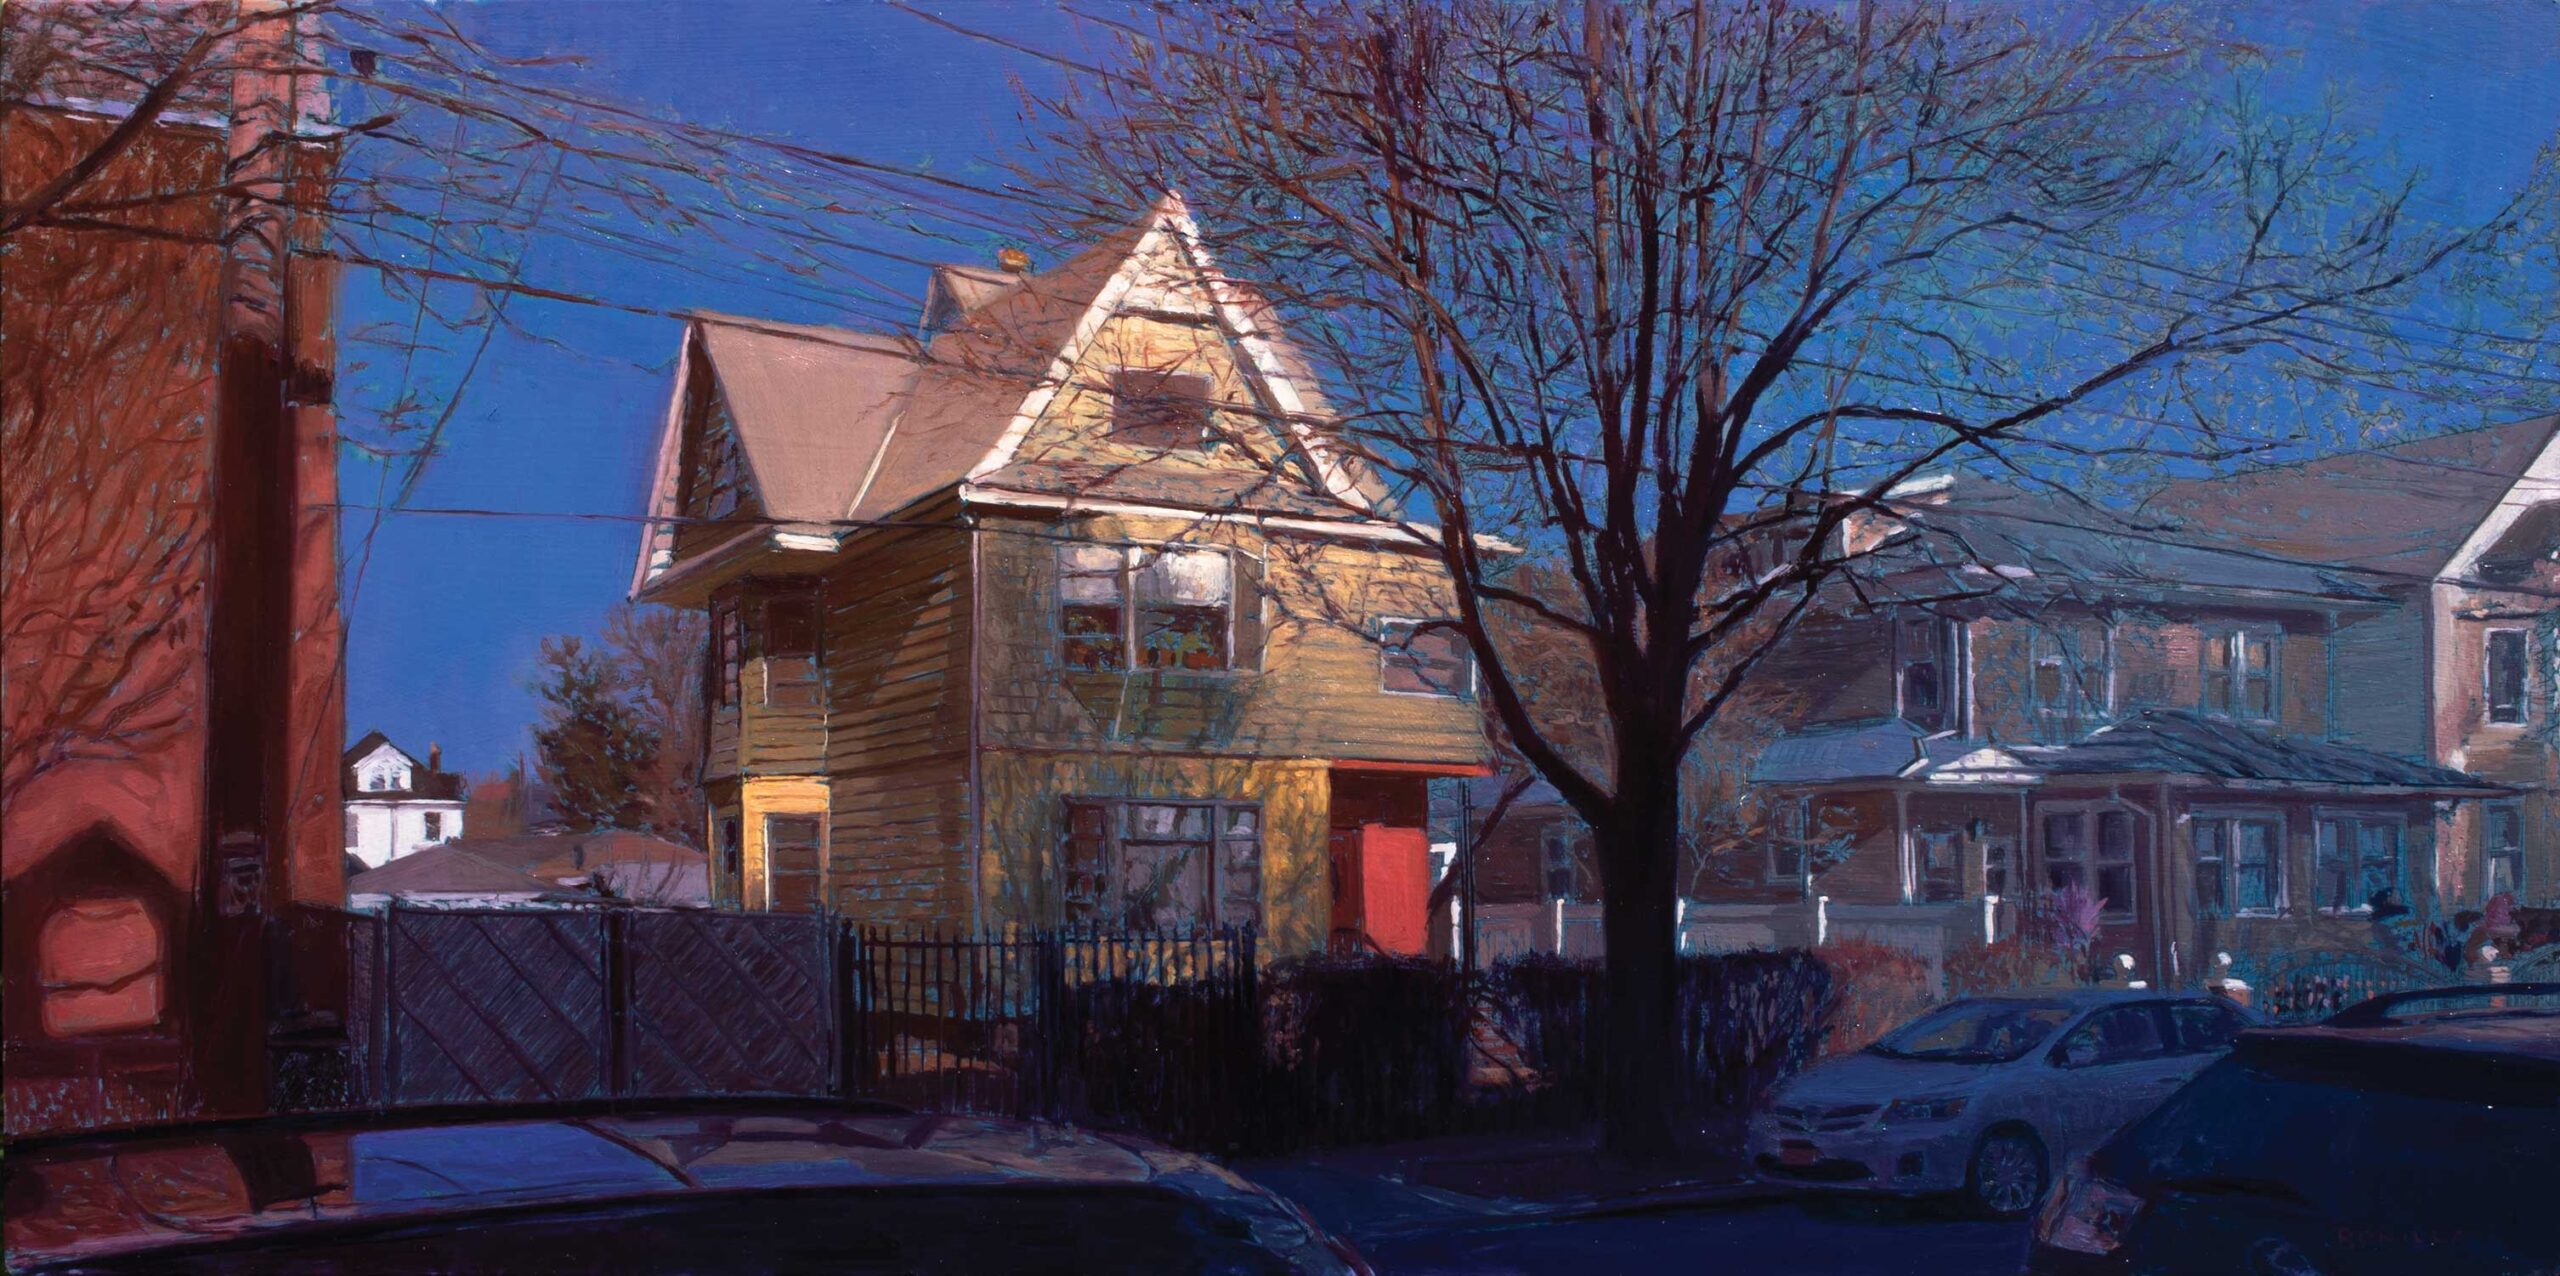 Raymond (Ray) Bonilla (b. 1983), "Across the Street from Mom and Dad’s," 2019, oil on panel, 12 x 24 in.